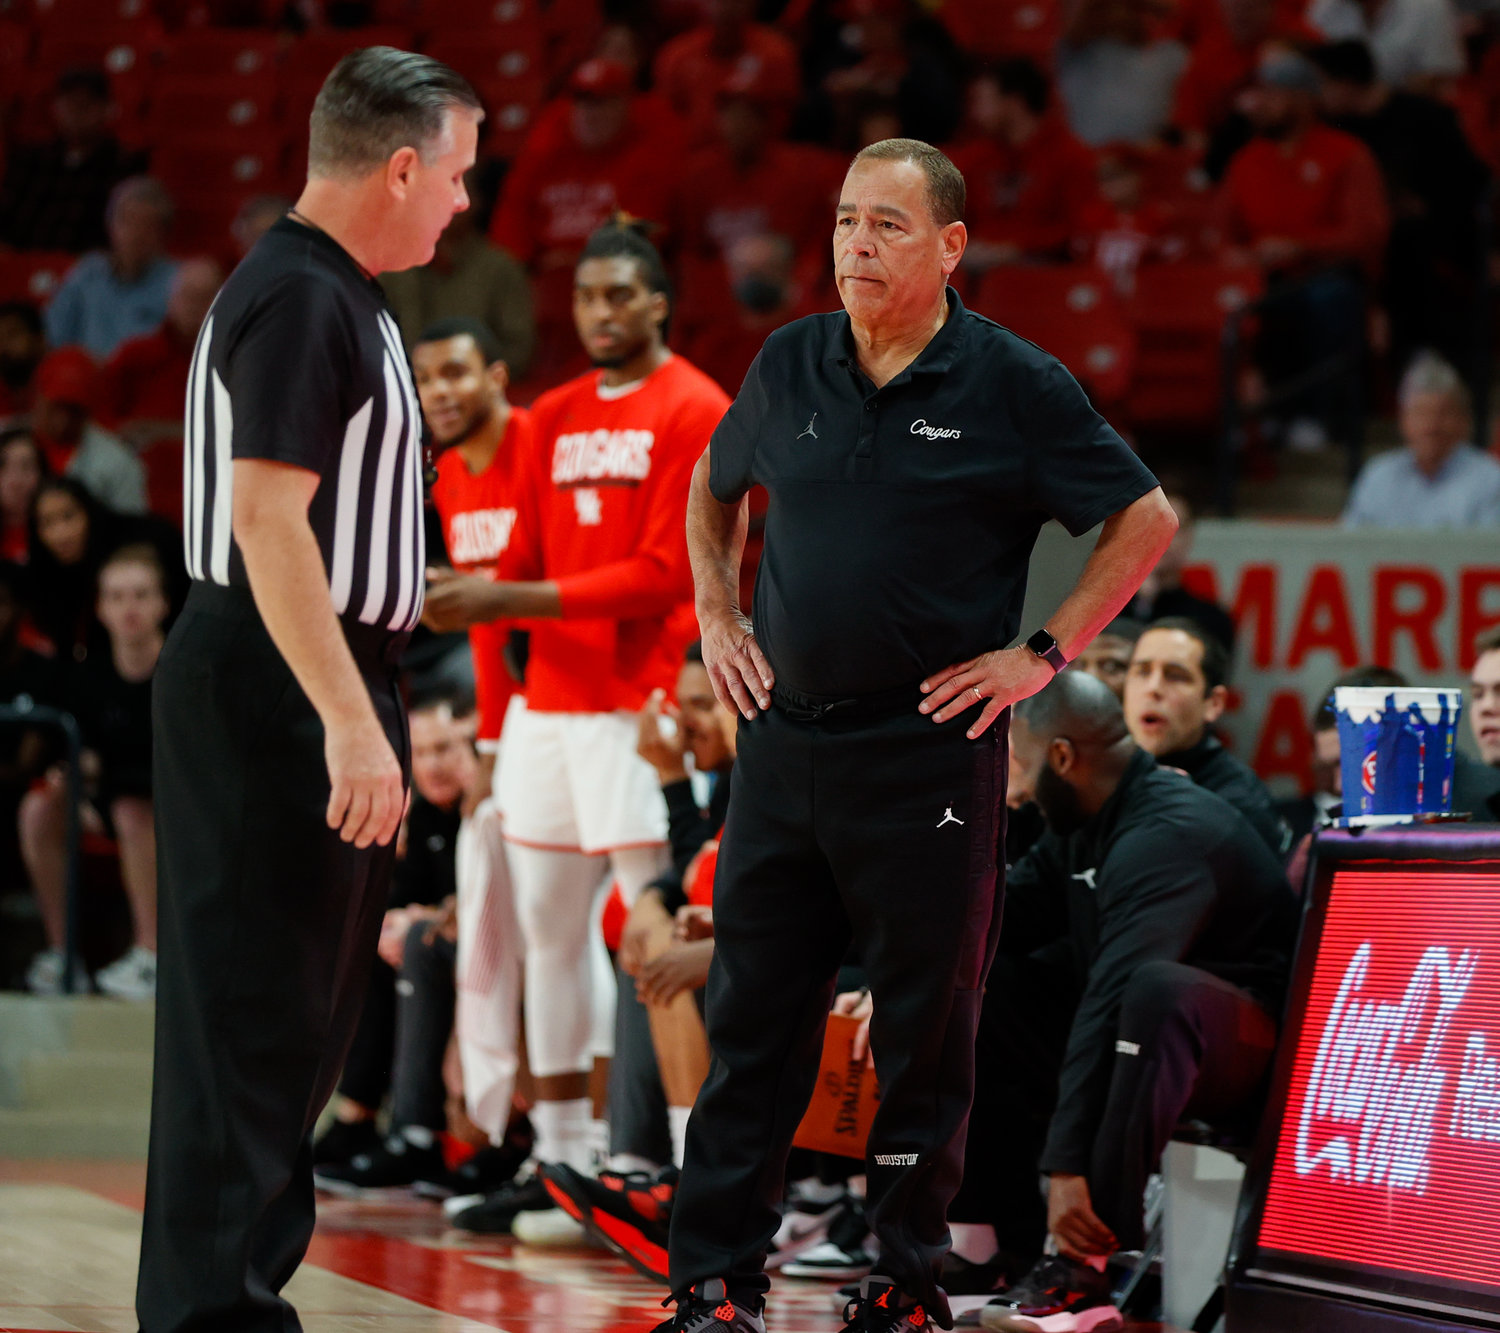 Houston head coach Kelvin Sampson talks with a game official during an NCAA men’s basketball game between the Houston Cougars and the Southern Methodist Mustangs on Jan. 5, 2023 in Houston. Houston won, 87-53,